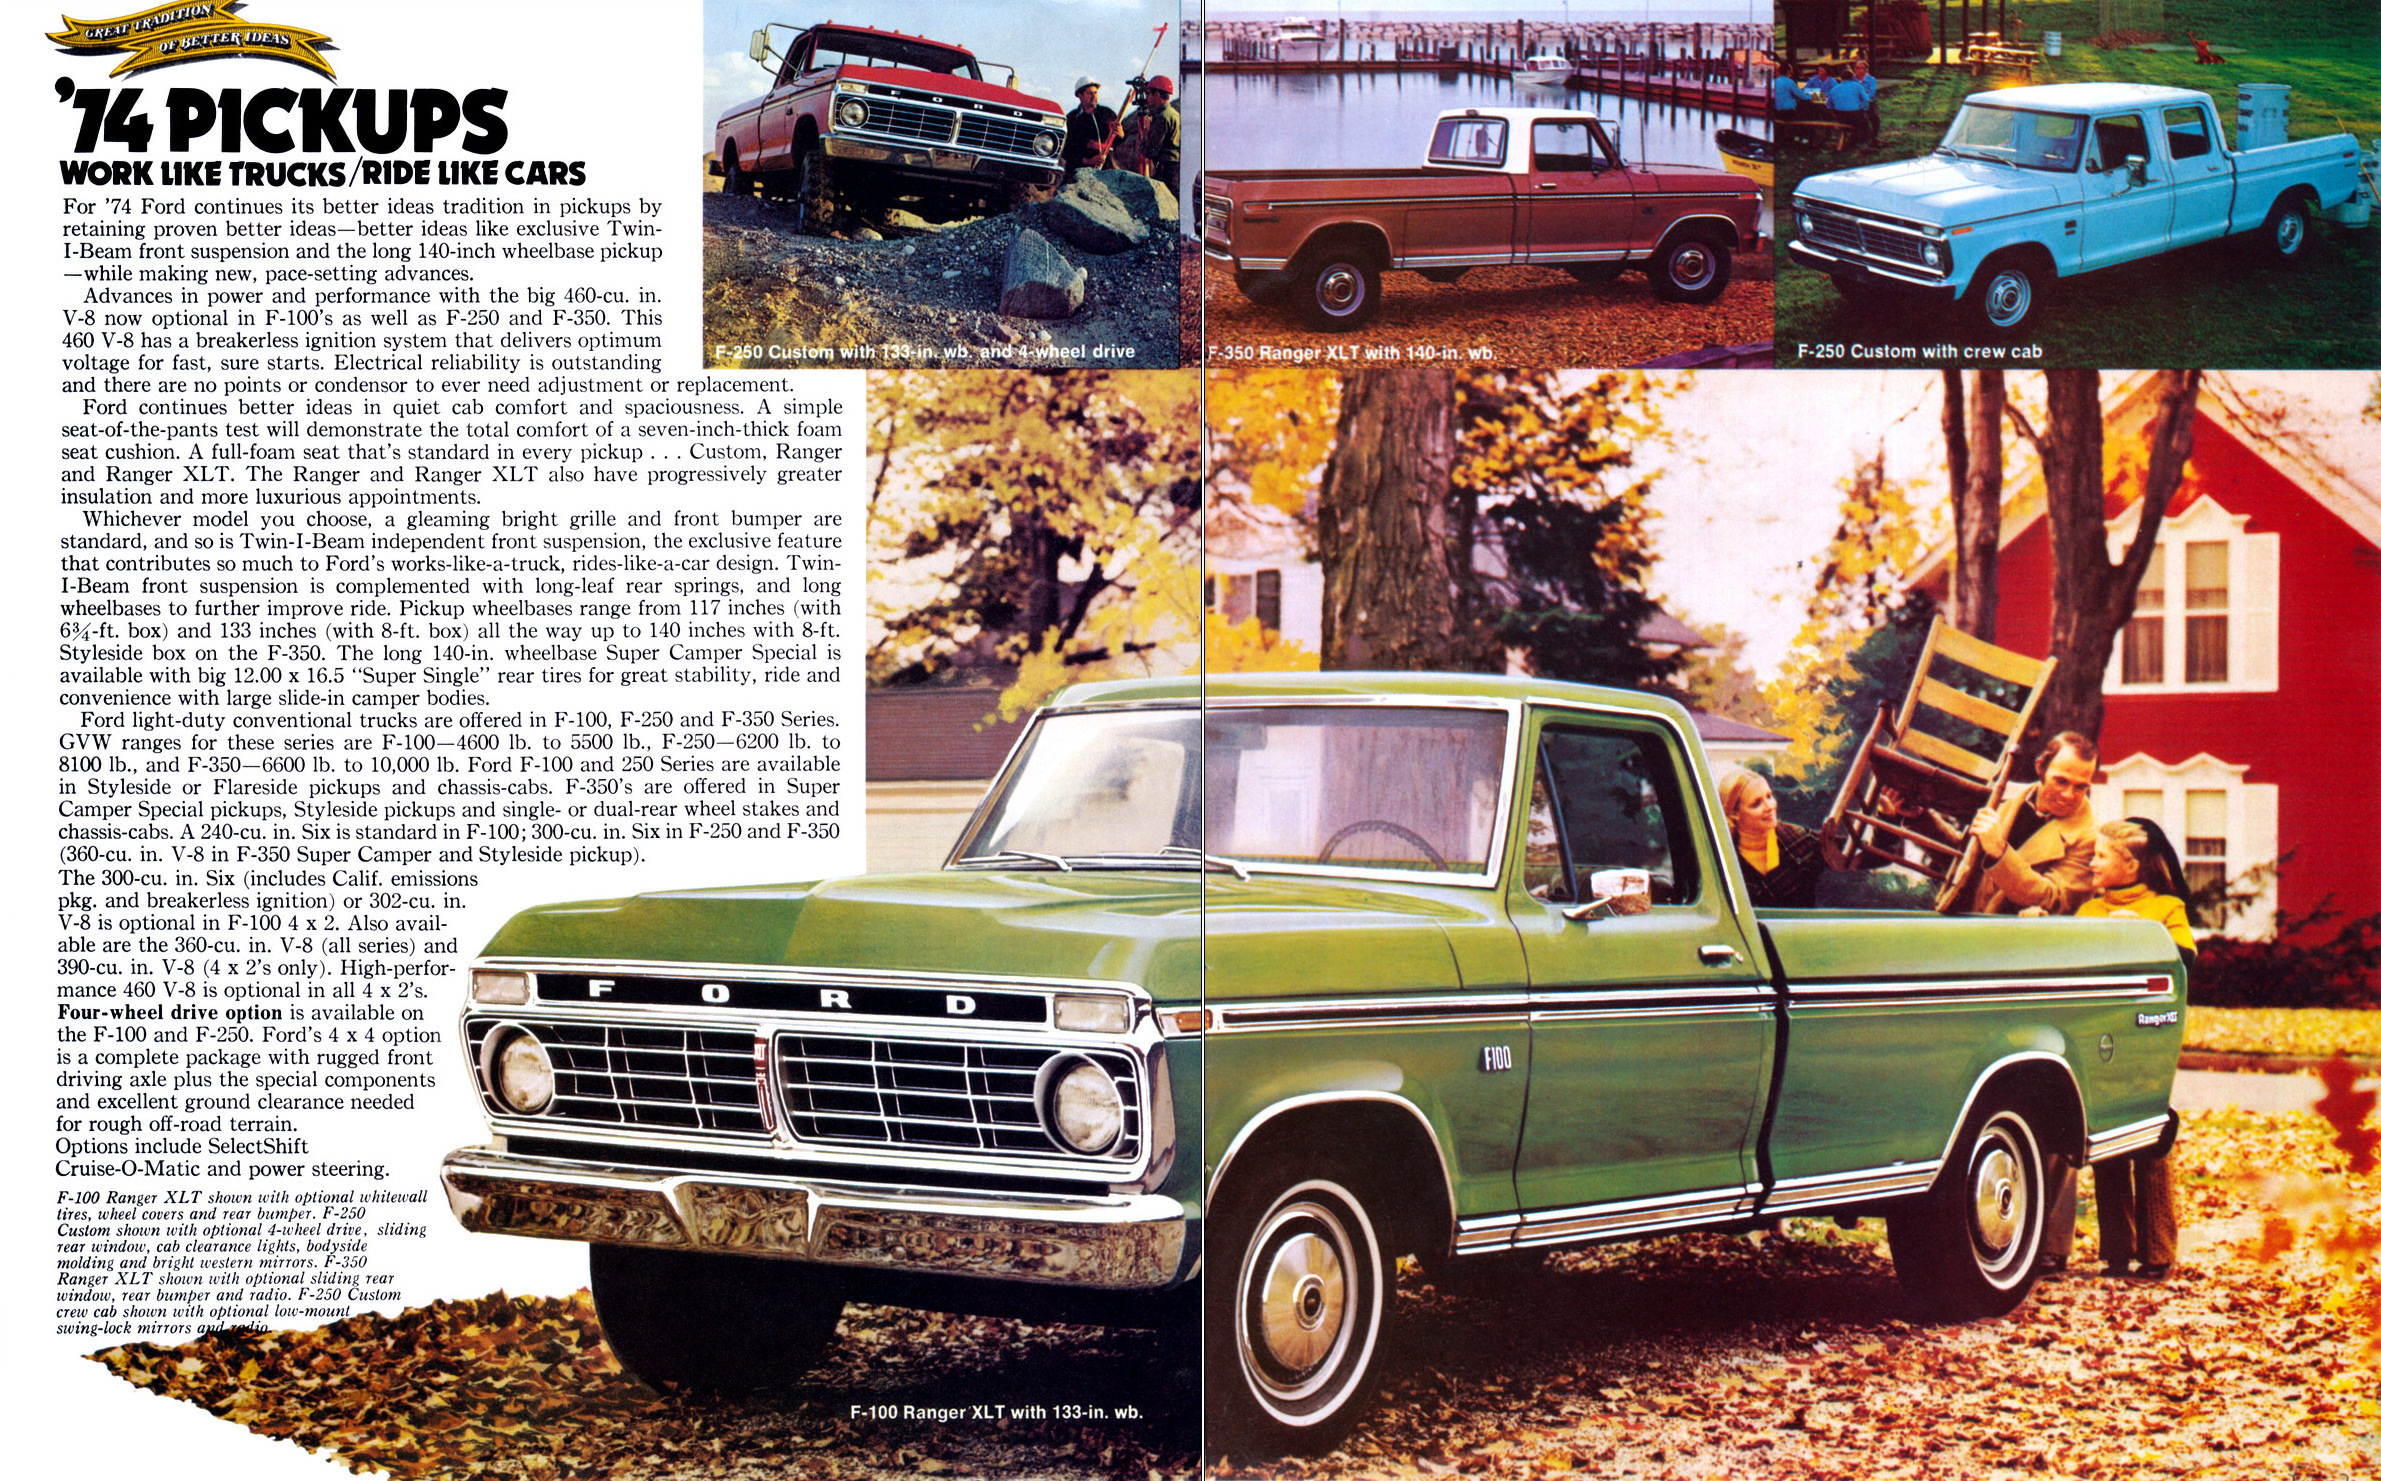 1974_Ford_Pickups-02-03